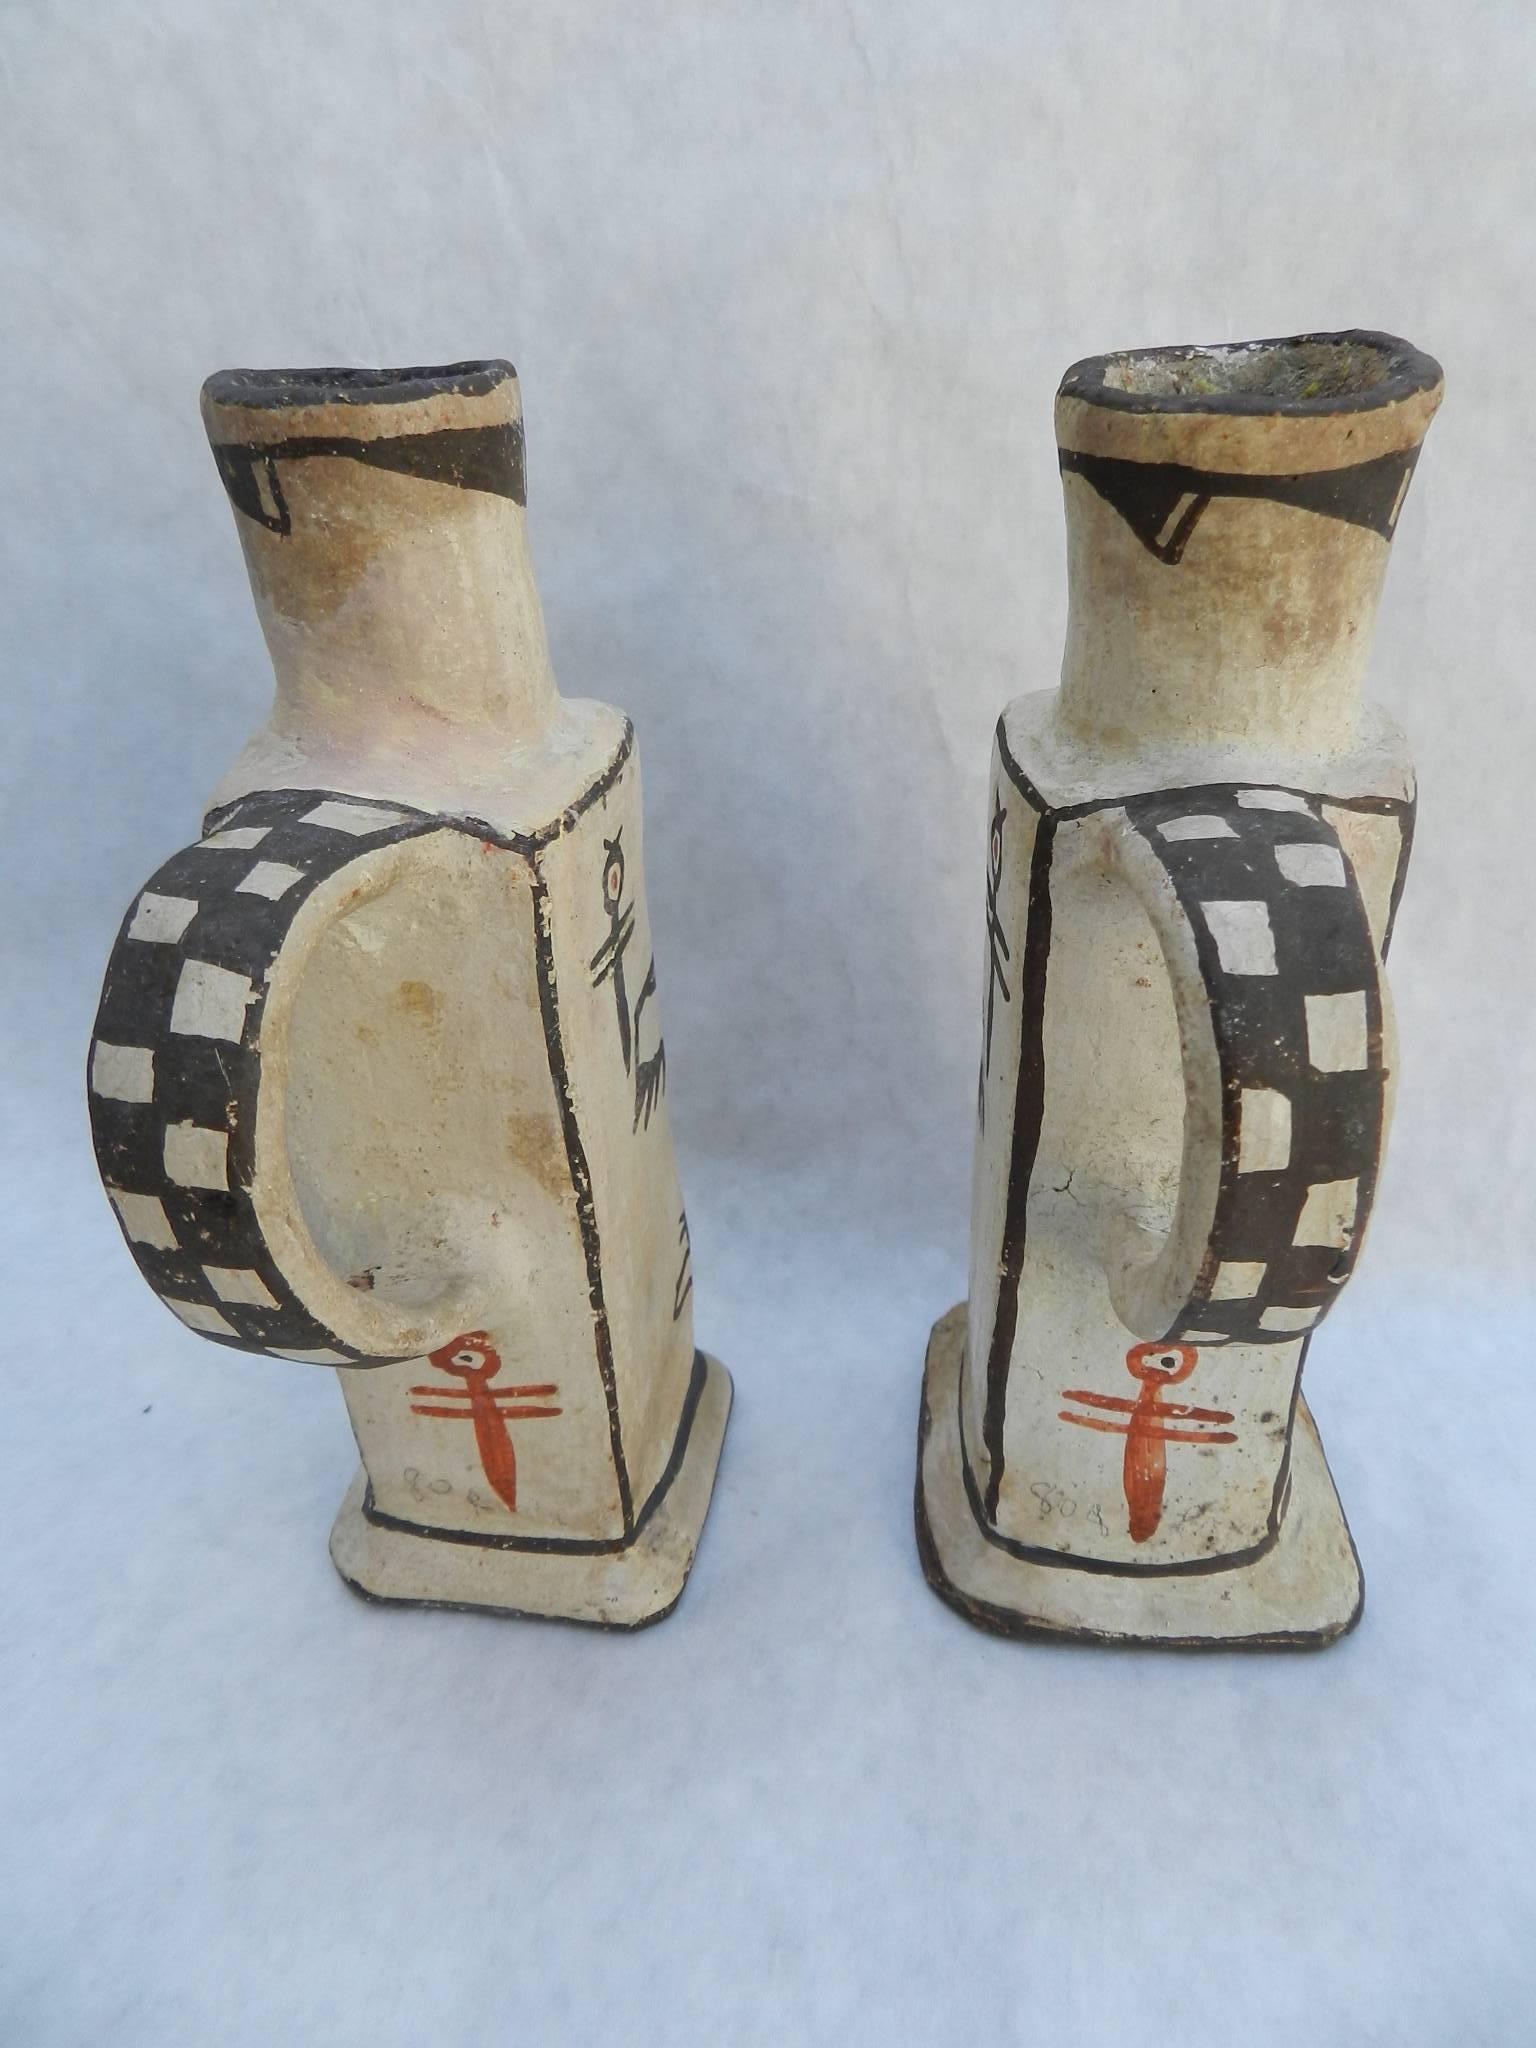 American Pair of Rare Antique Zuni Pueblo Pottery Candleholders or Candlesticks